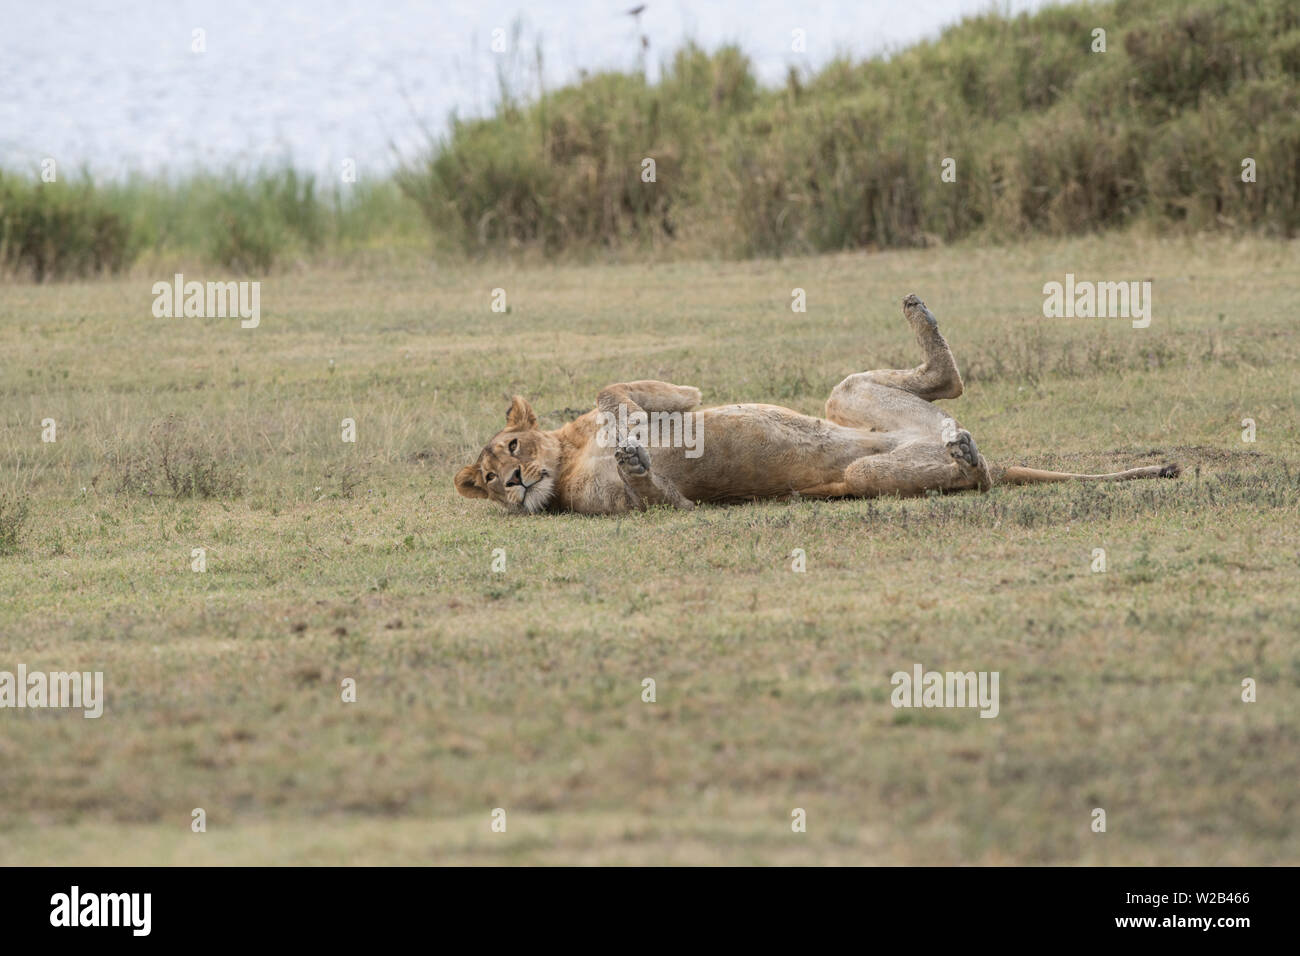 Lioness rolling over, Ngorongoro Crater Stock Photo